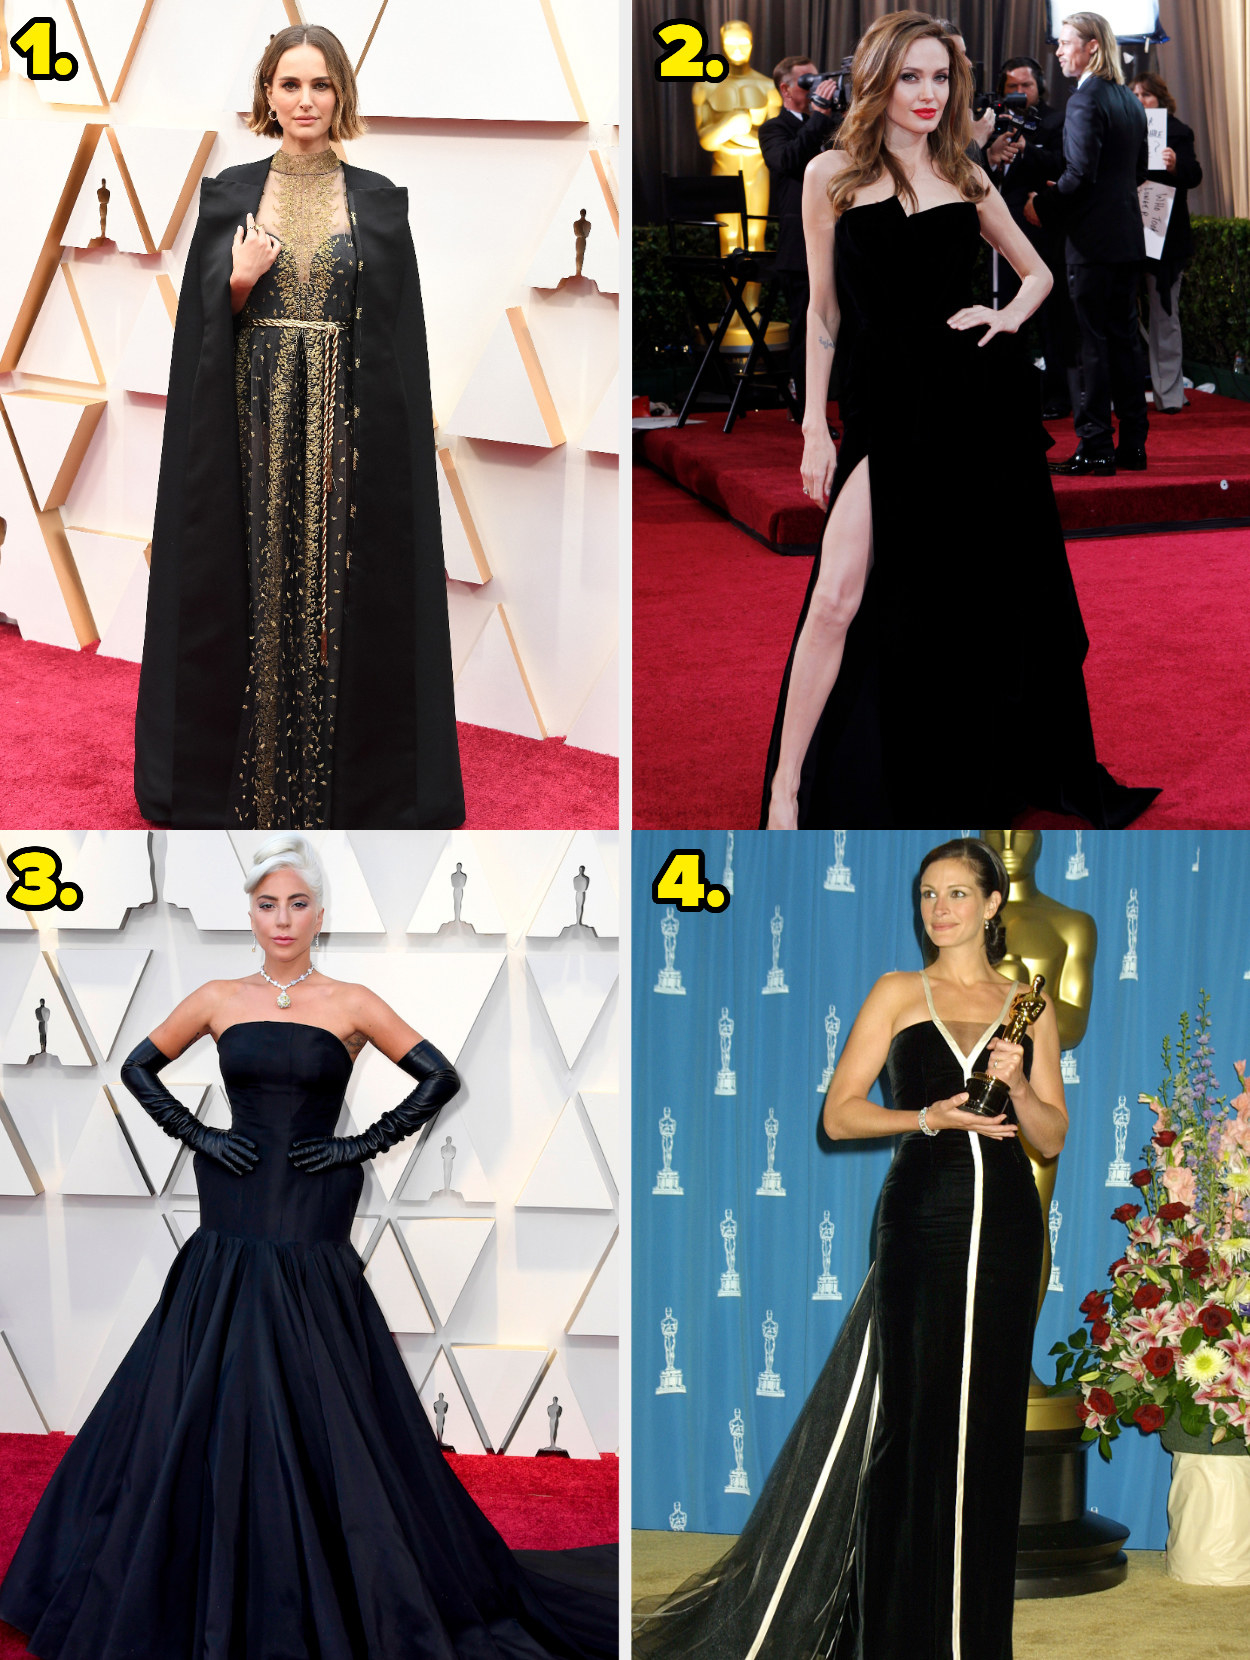 1. Natalie Portman wears a black gown with a gold lace overlay and a cape. 2. Angelina Jolie wears a strapless gown with a giant thigh slit. 3. Lady Gaga wears a strapless gown with gloves. 4 Julia Roberts wears a halter neck gown with a train